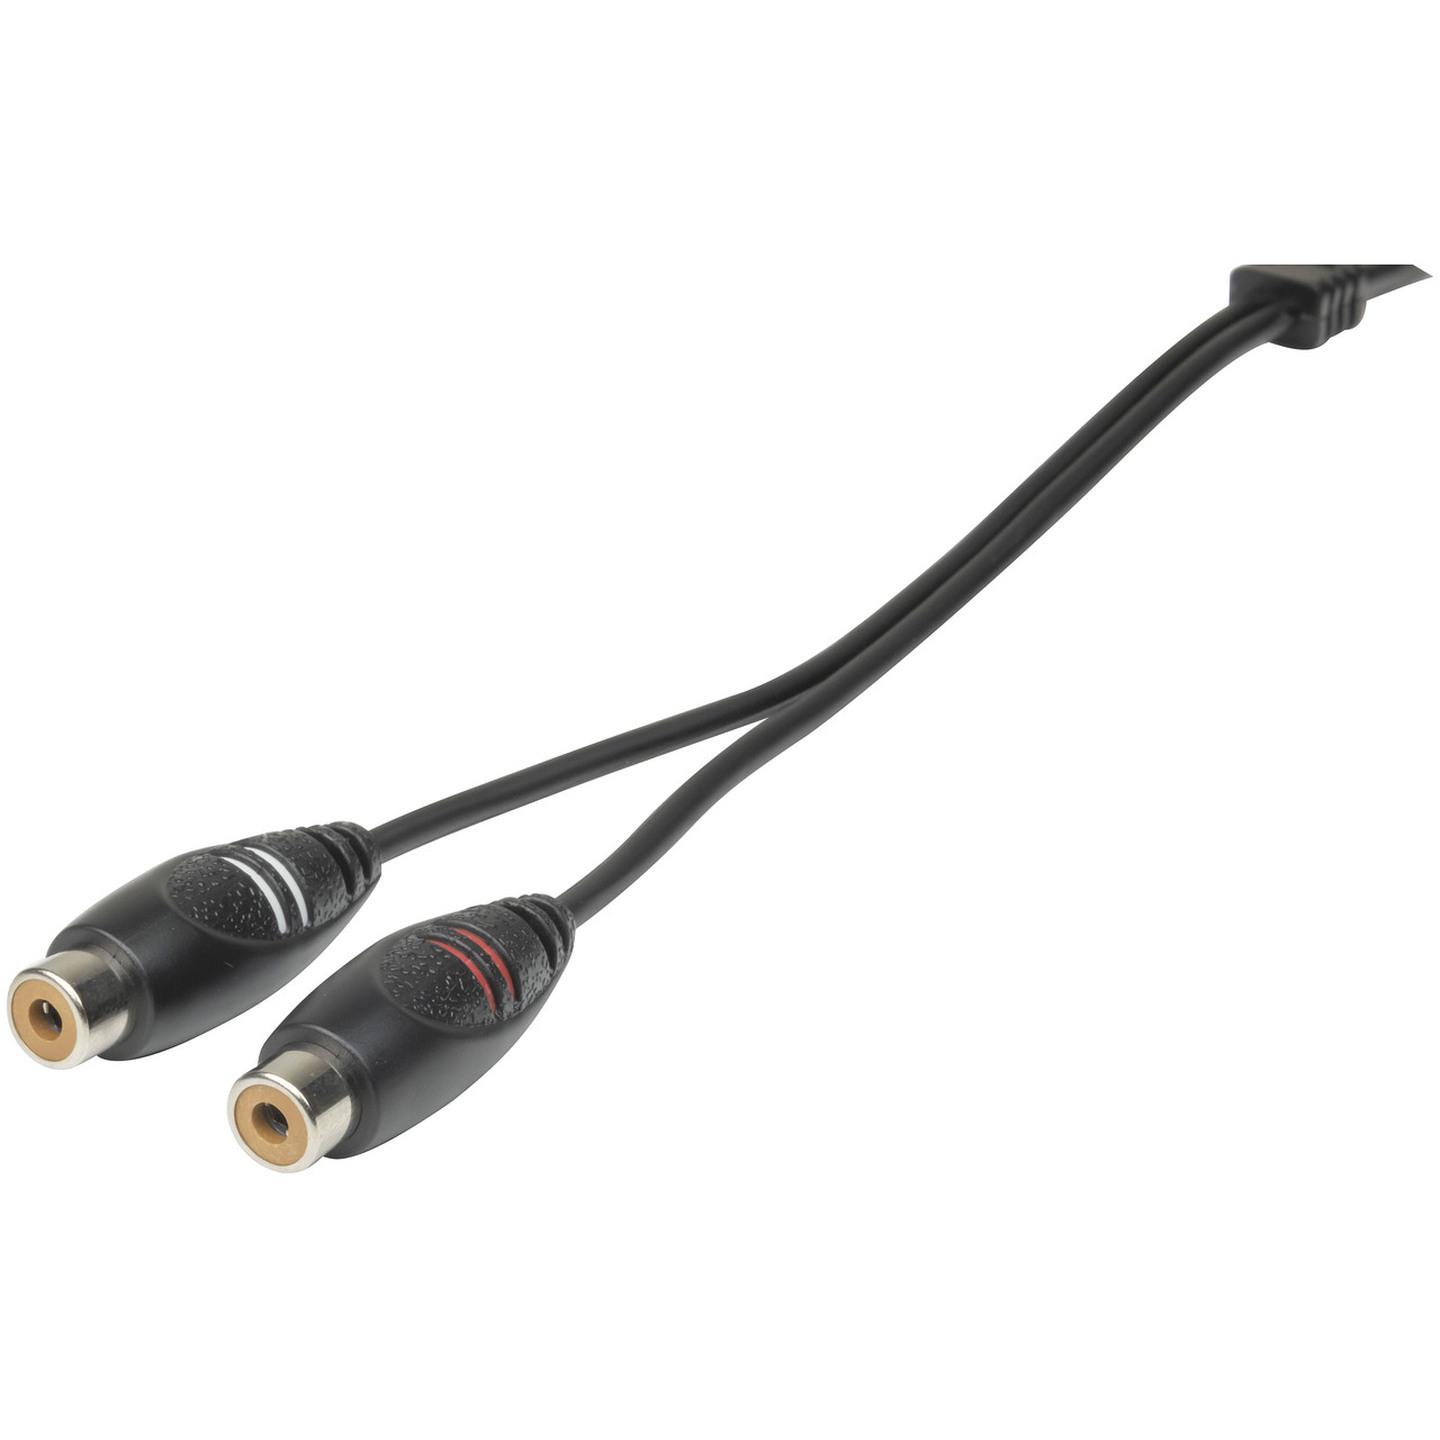 2 x RCA Plugs to 2 x RCA Sockets Audio Cable - 1.5m